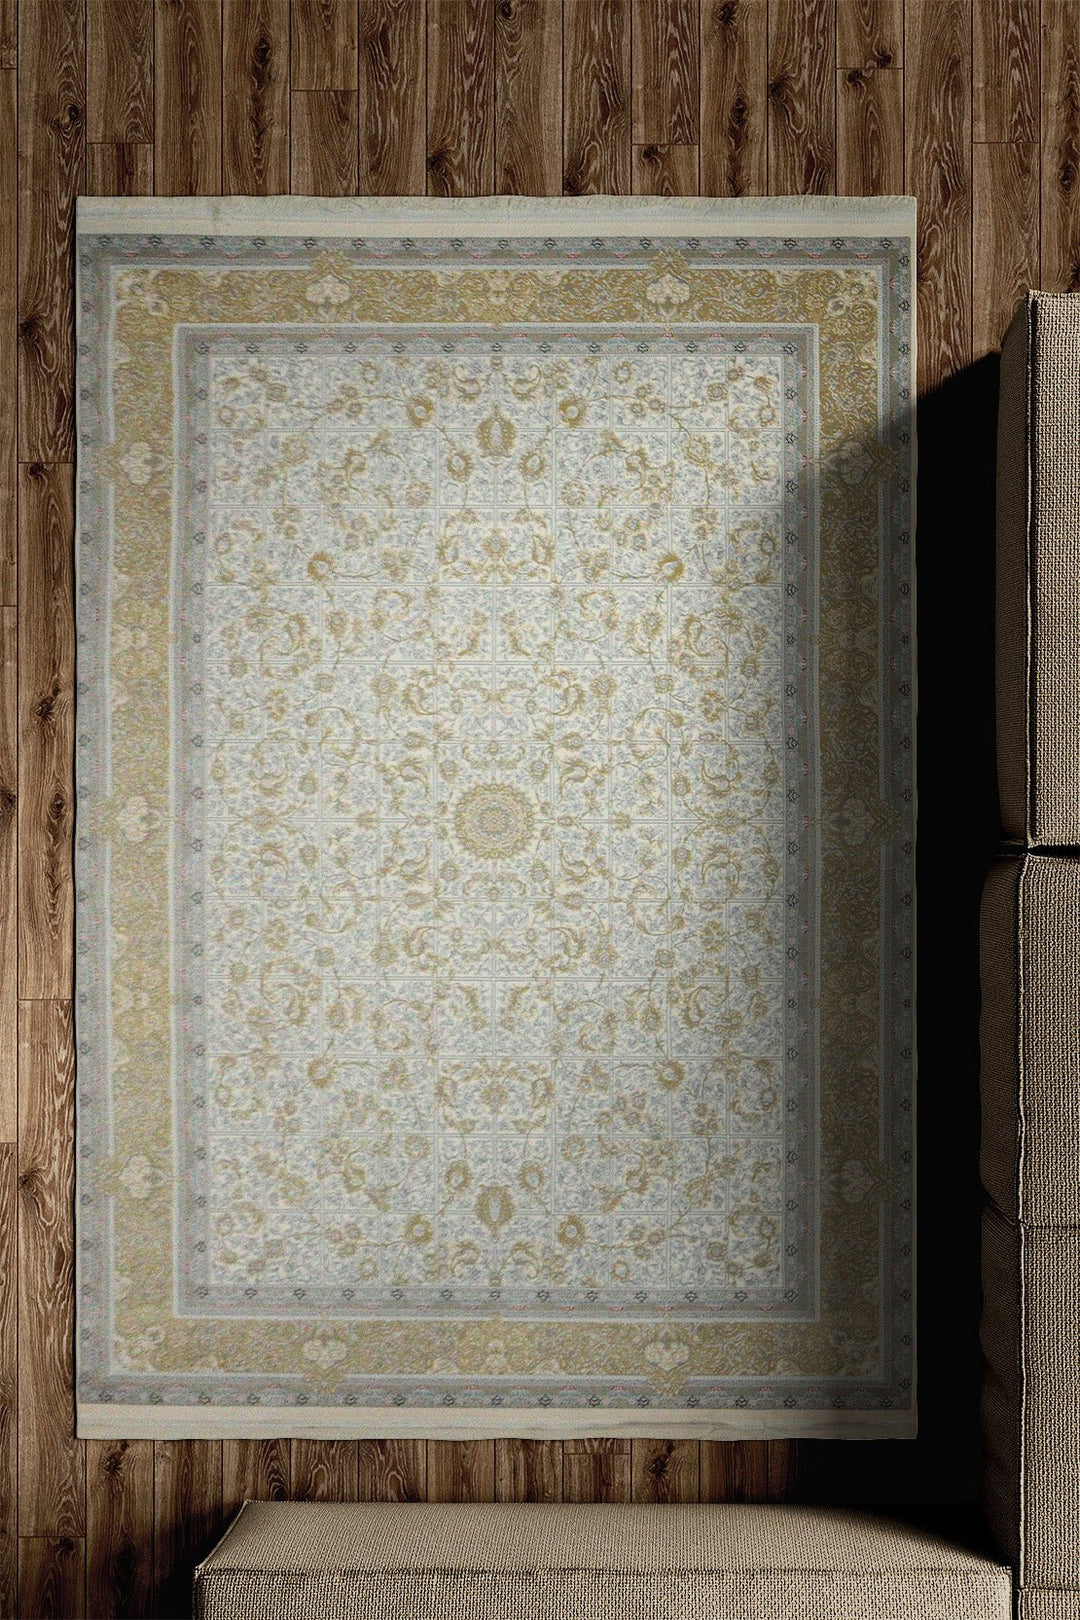 Iranian Premium Quality Hedyeh Collection (1000) Rug - 4.9 x 7.3 FT - Cream - Resilient Construction for Long-Lasting Use - V Surfaces